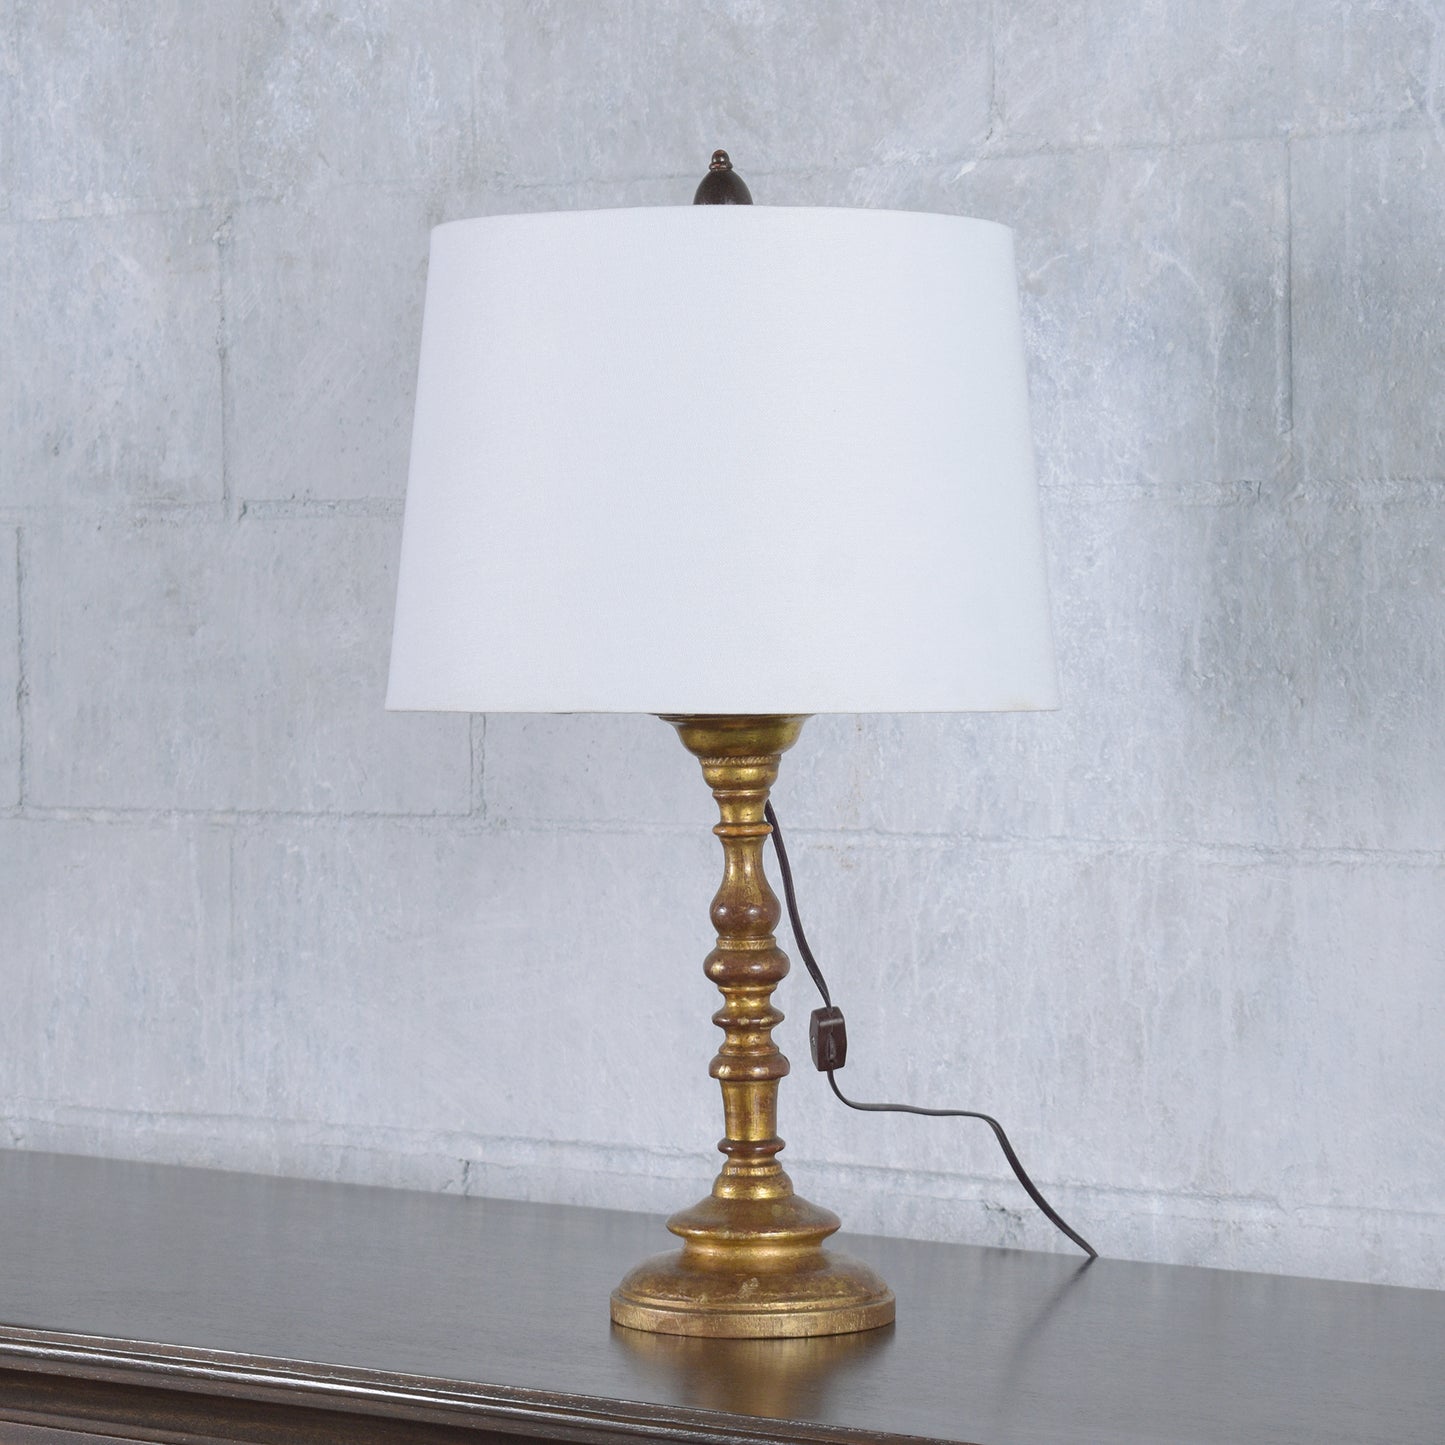 19th-Century Hand-Crafted Giltwood Table Lamp with New Off-White Shade